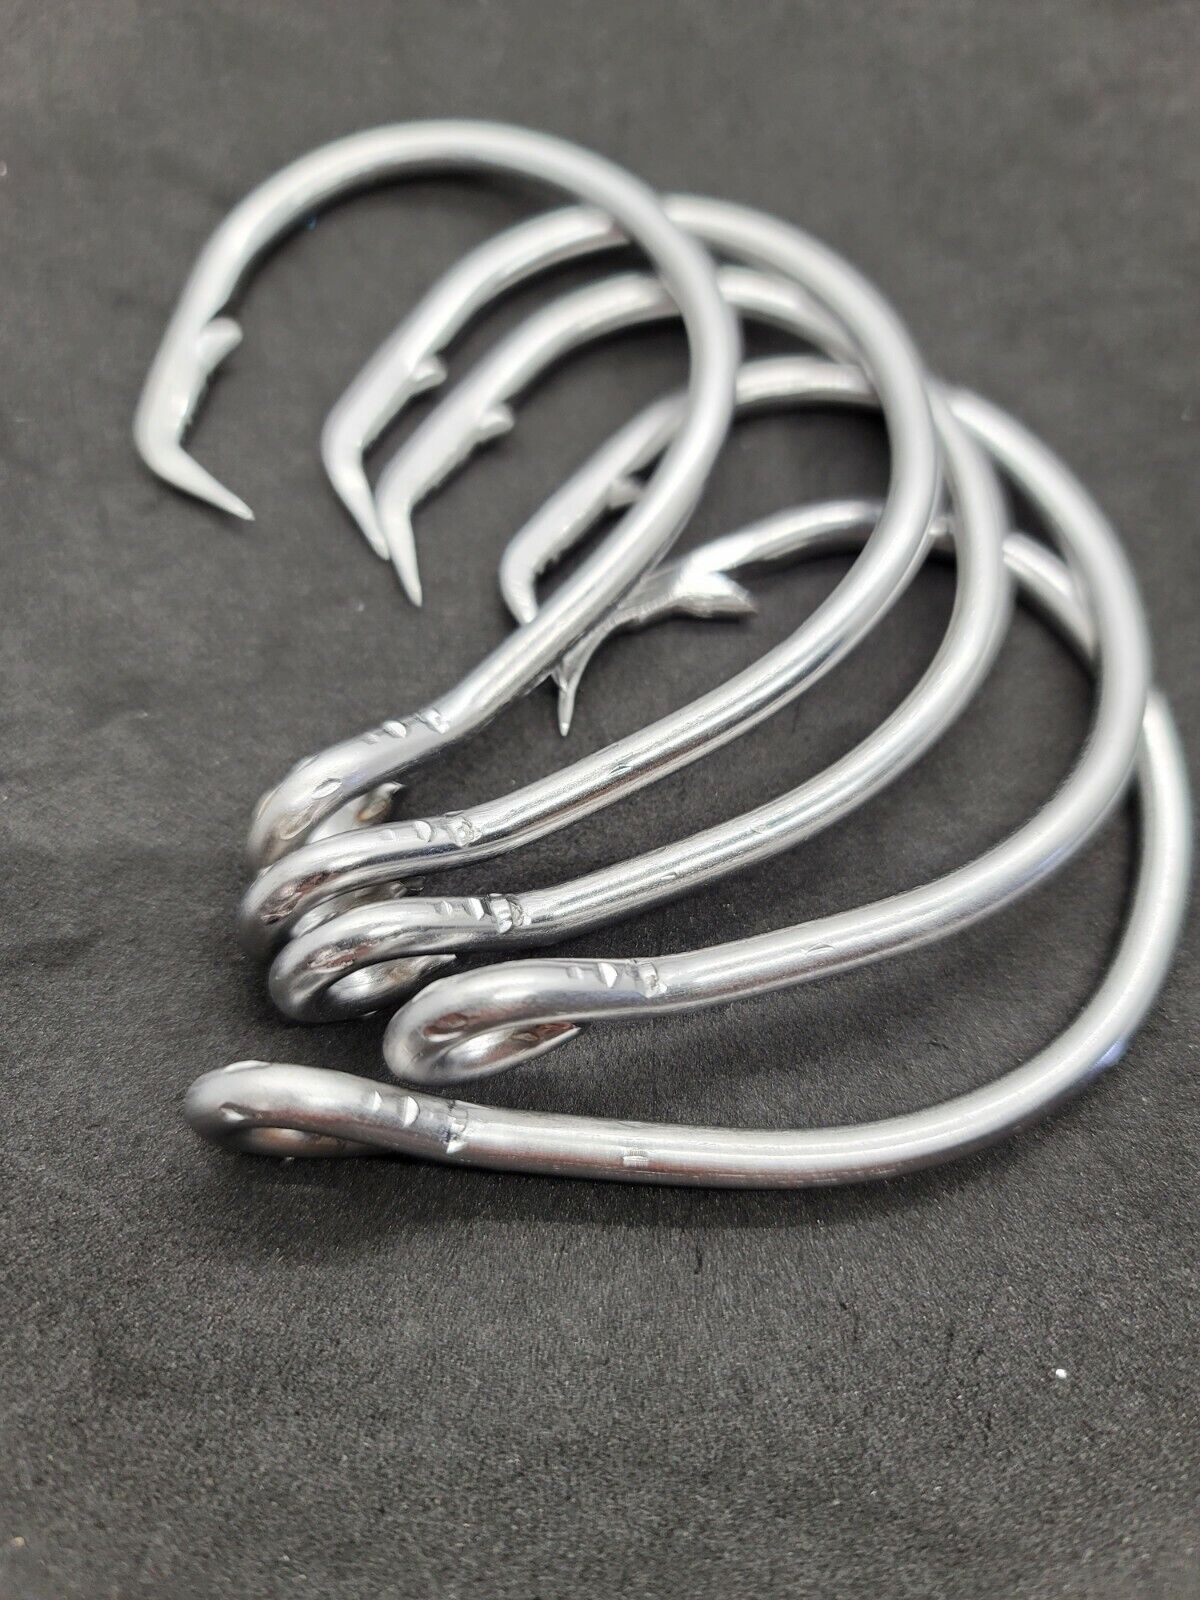 Fishing Hook 6/0-28/0 Forged in-Line Circle Hooks Shark